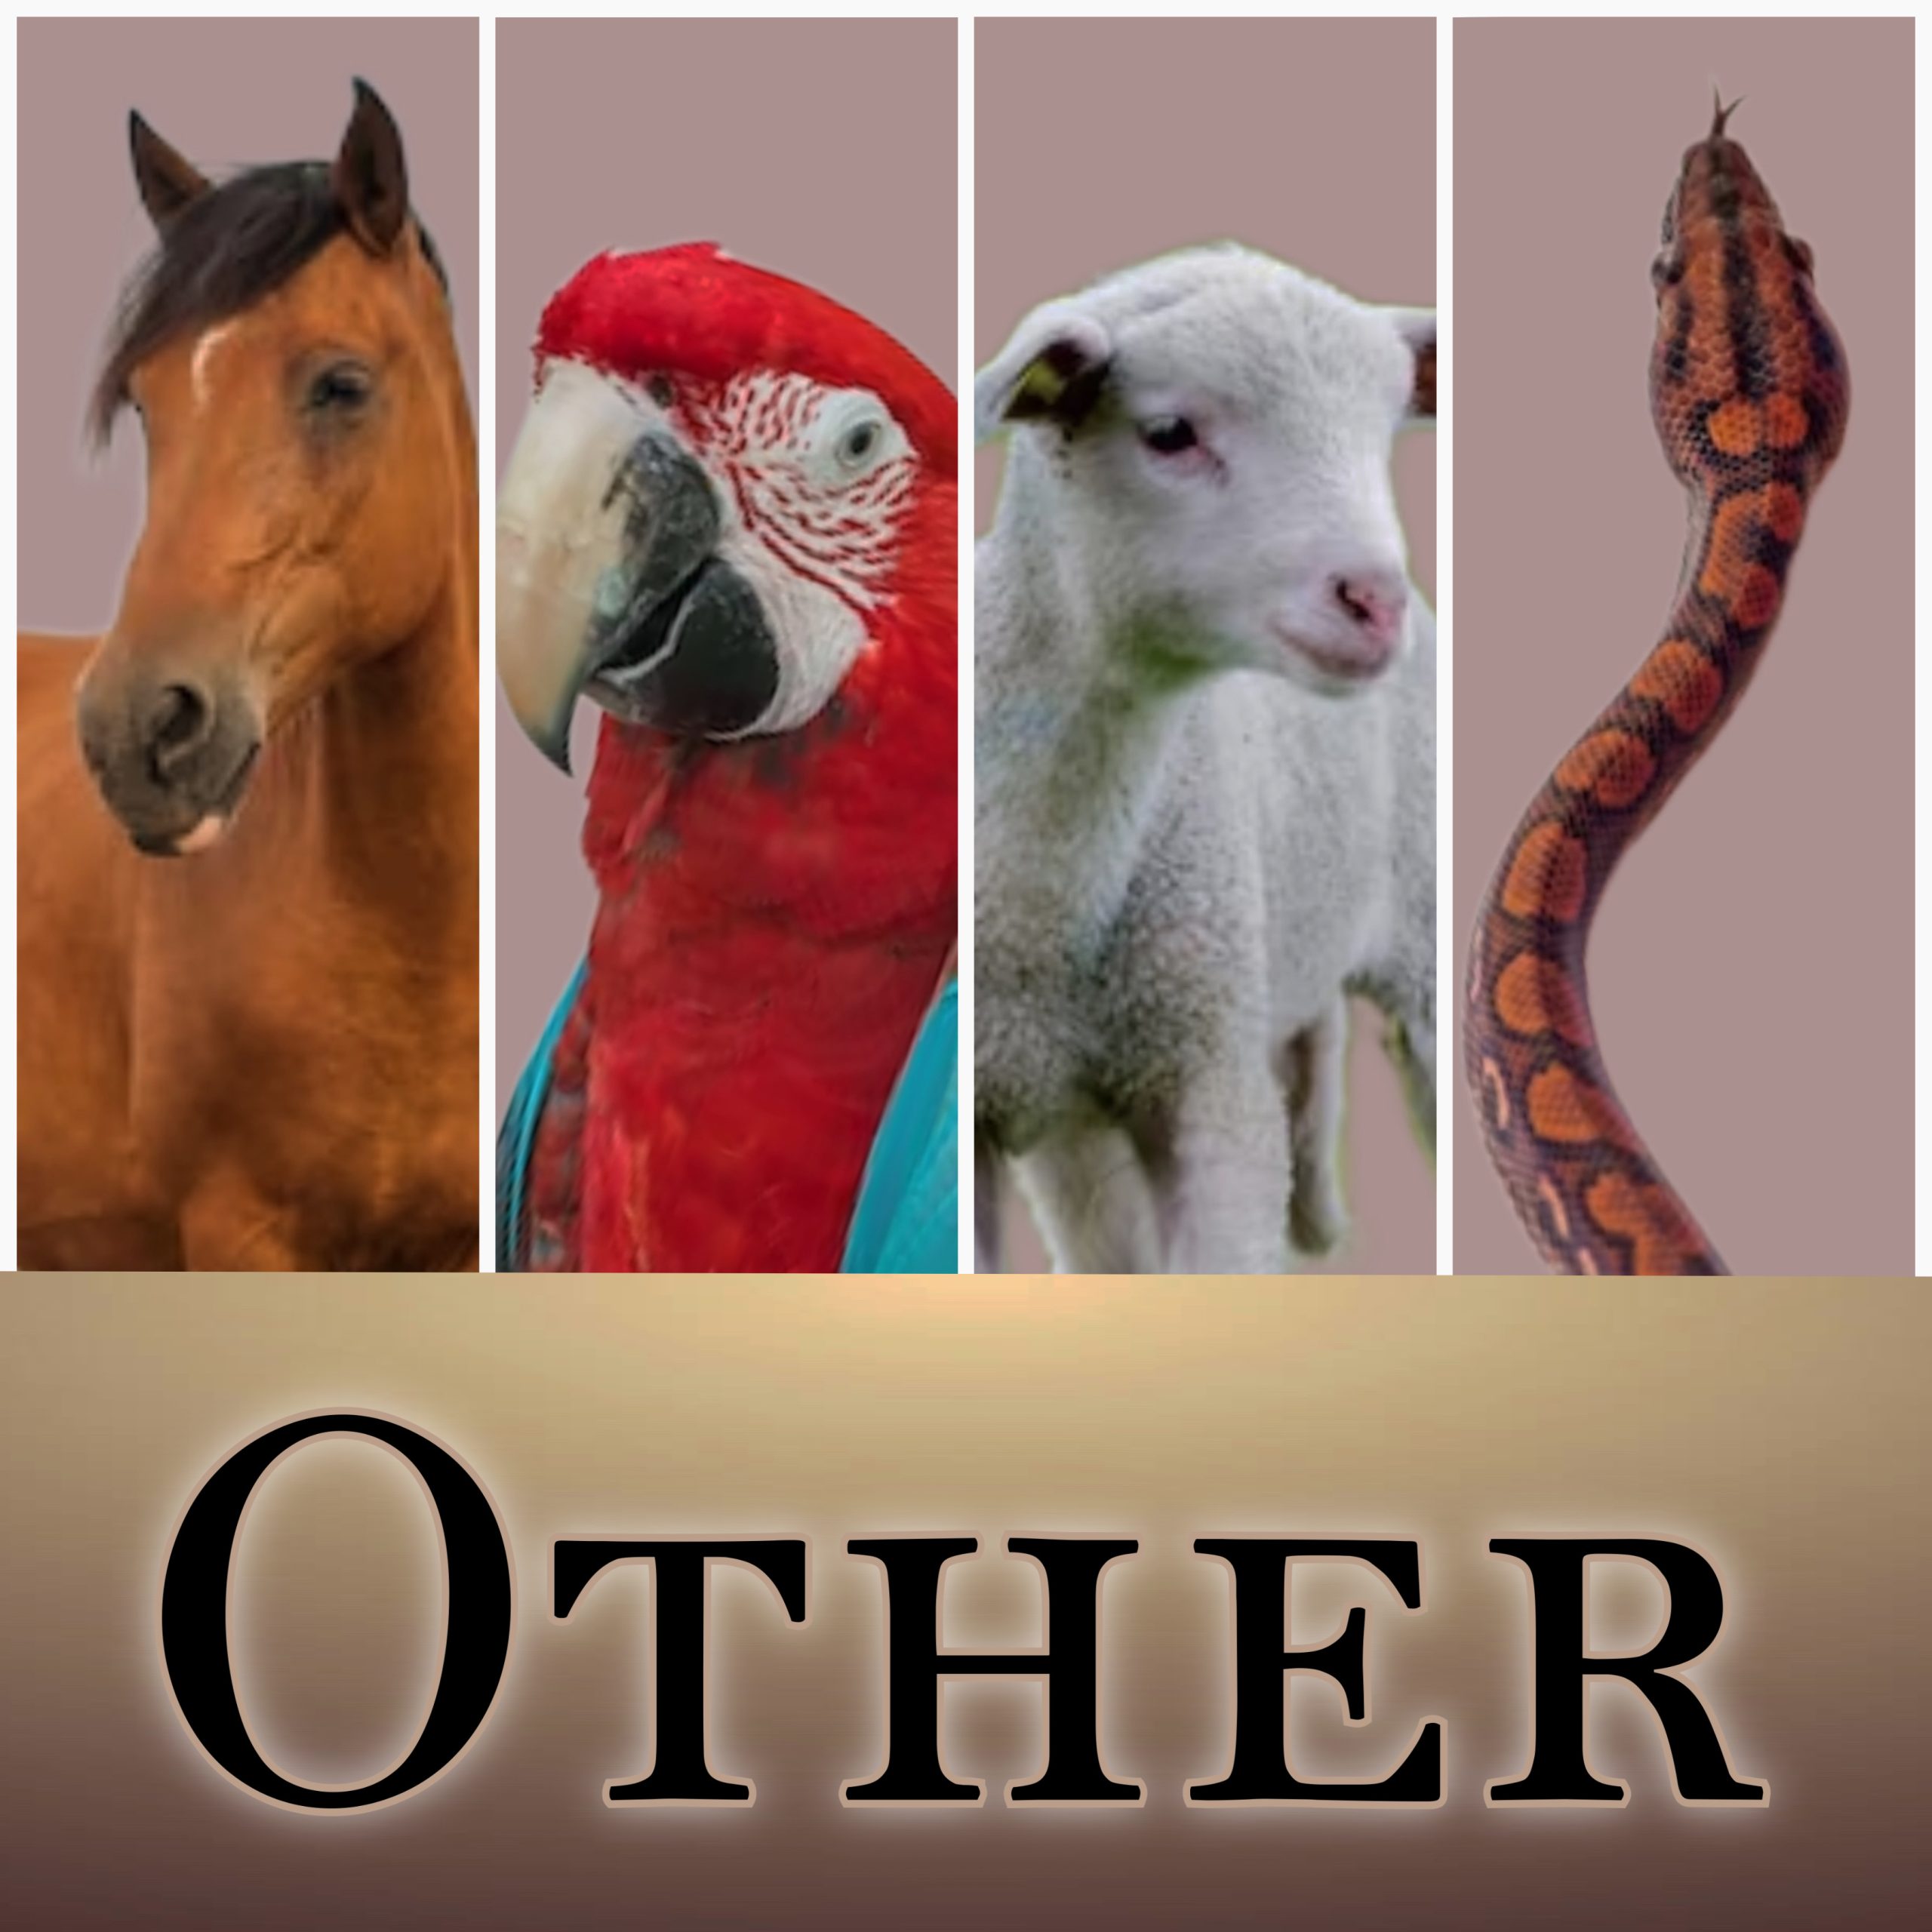 A graphic representing other animals that are available for movie, tv & print work through Paws For Effect. There is a horse, a macaw & lamb and a snake pictured. Text reads "OTHER".